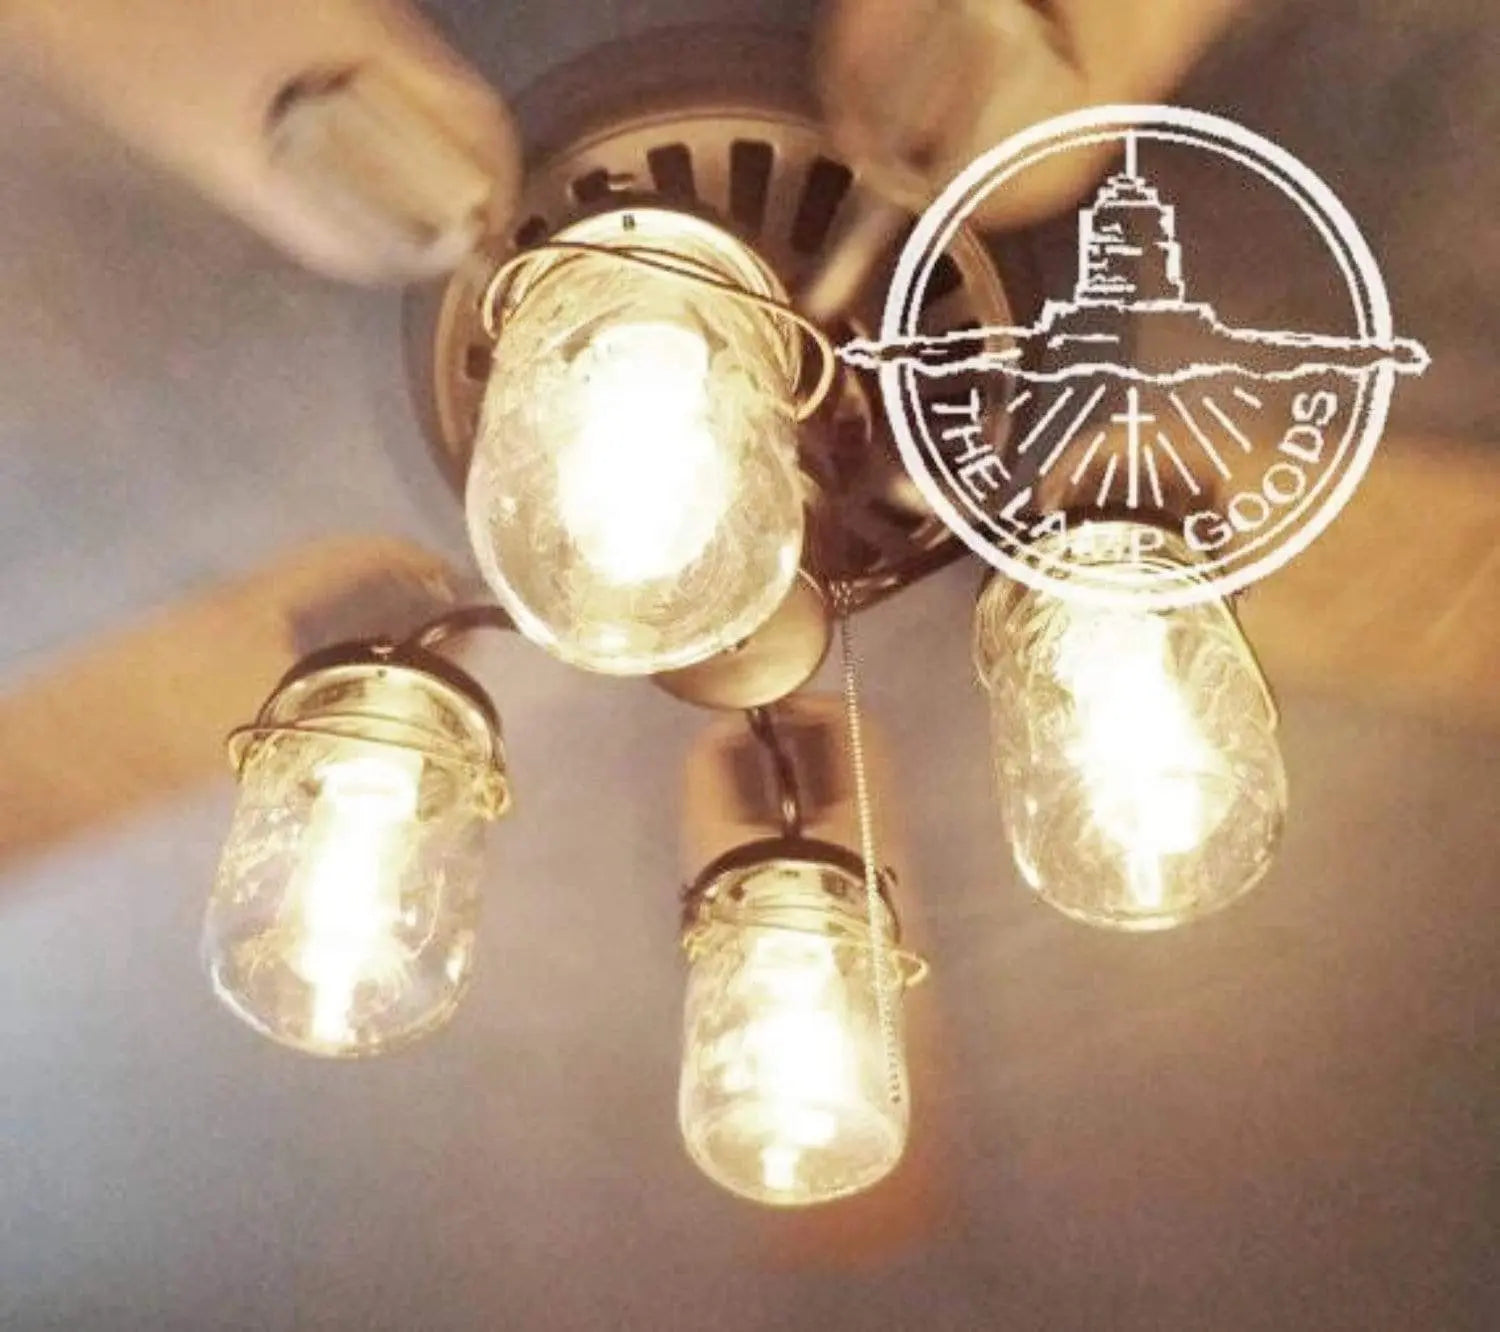 Mason Jar LIGHT KIT for Ceiling Fan with Vintage Pints - The Lamp Goods